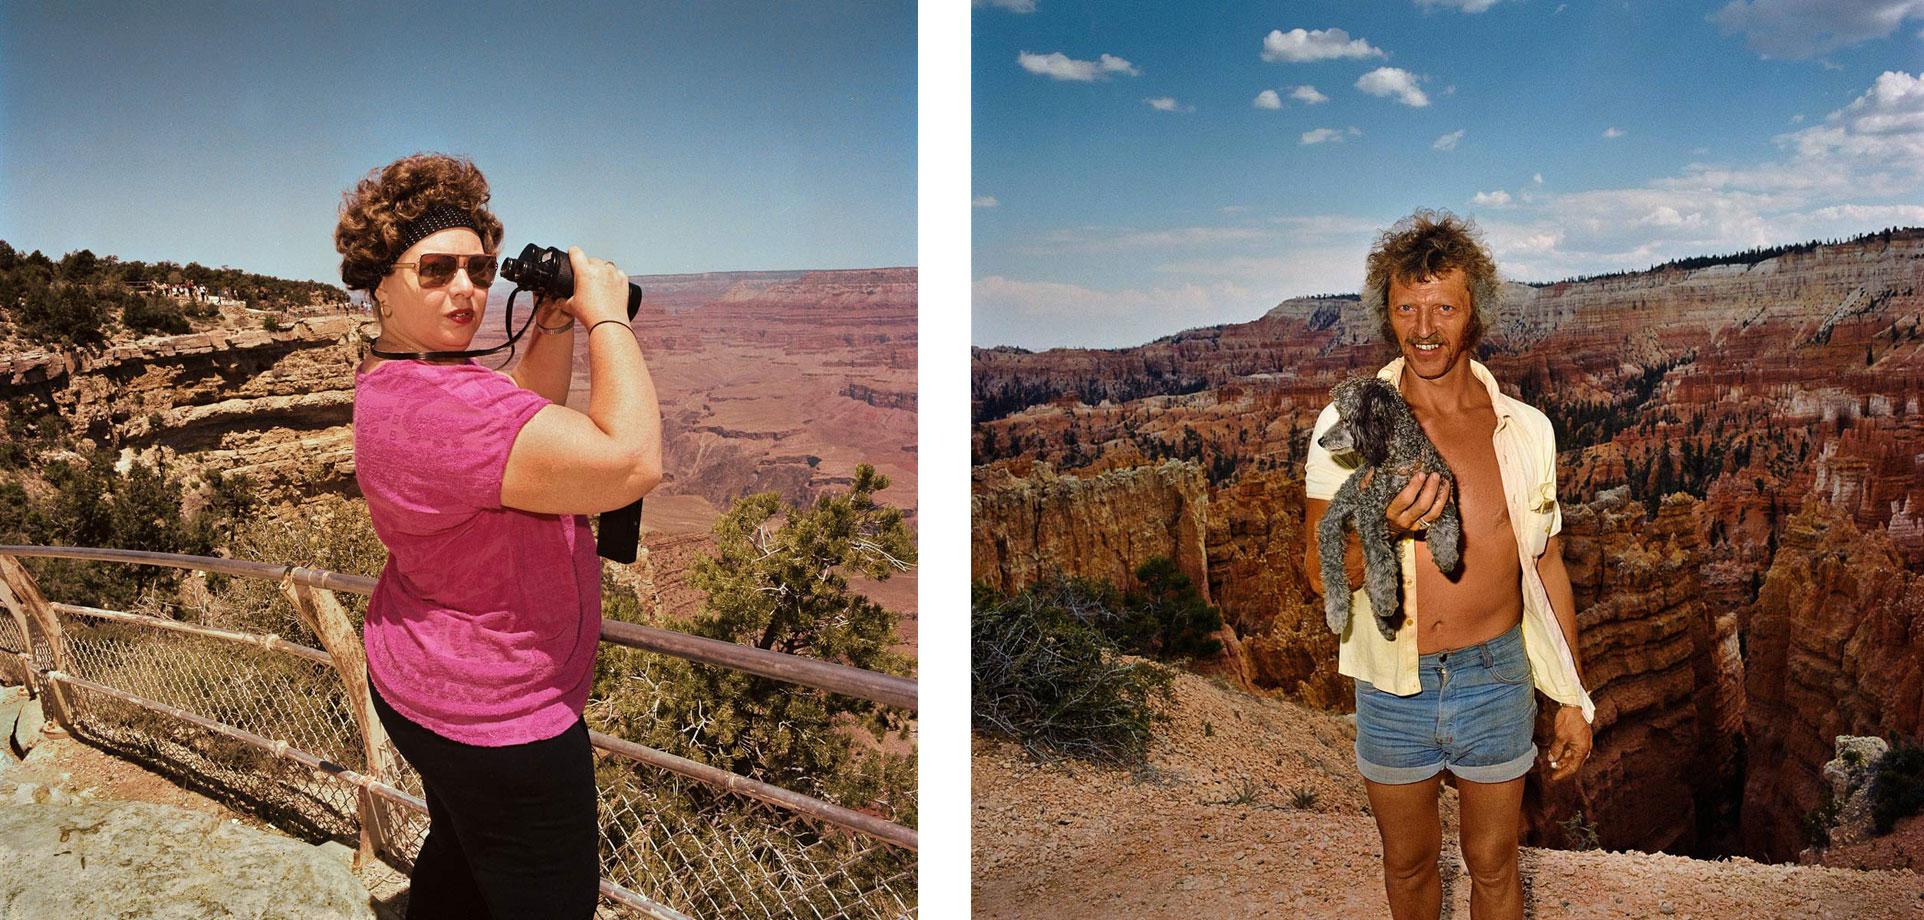 Woman with Bincoculars at South Rim Grand Canyon National Park, AZ. 1980 (l) Man with Dog at Sunset Point Bryce Canyon National Park, UT. 1980 (r)